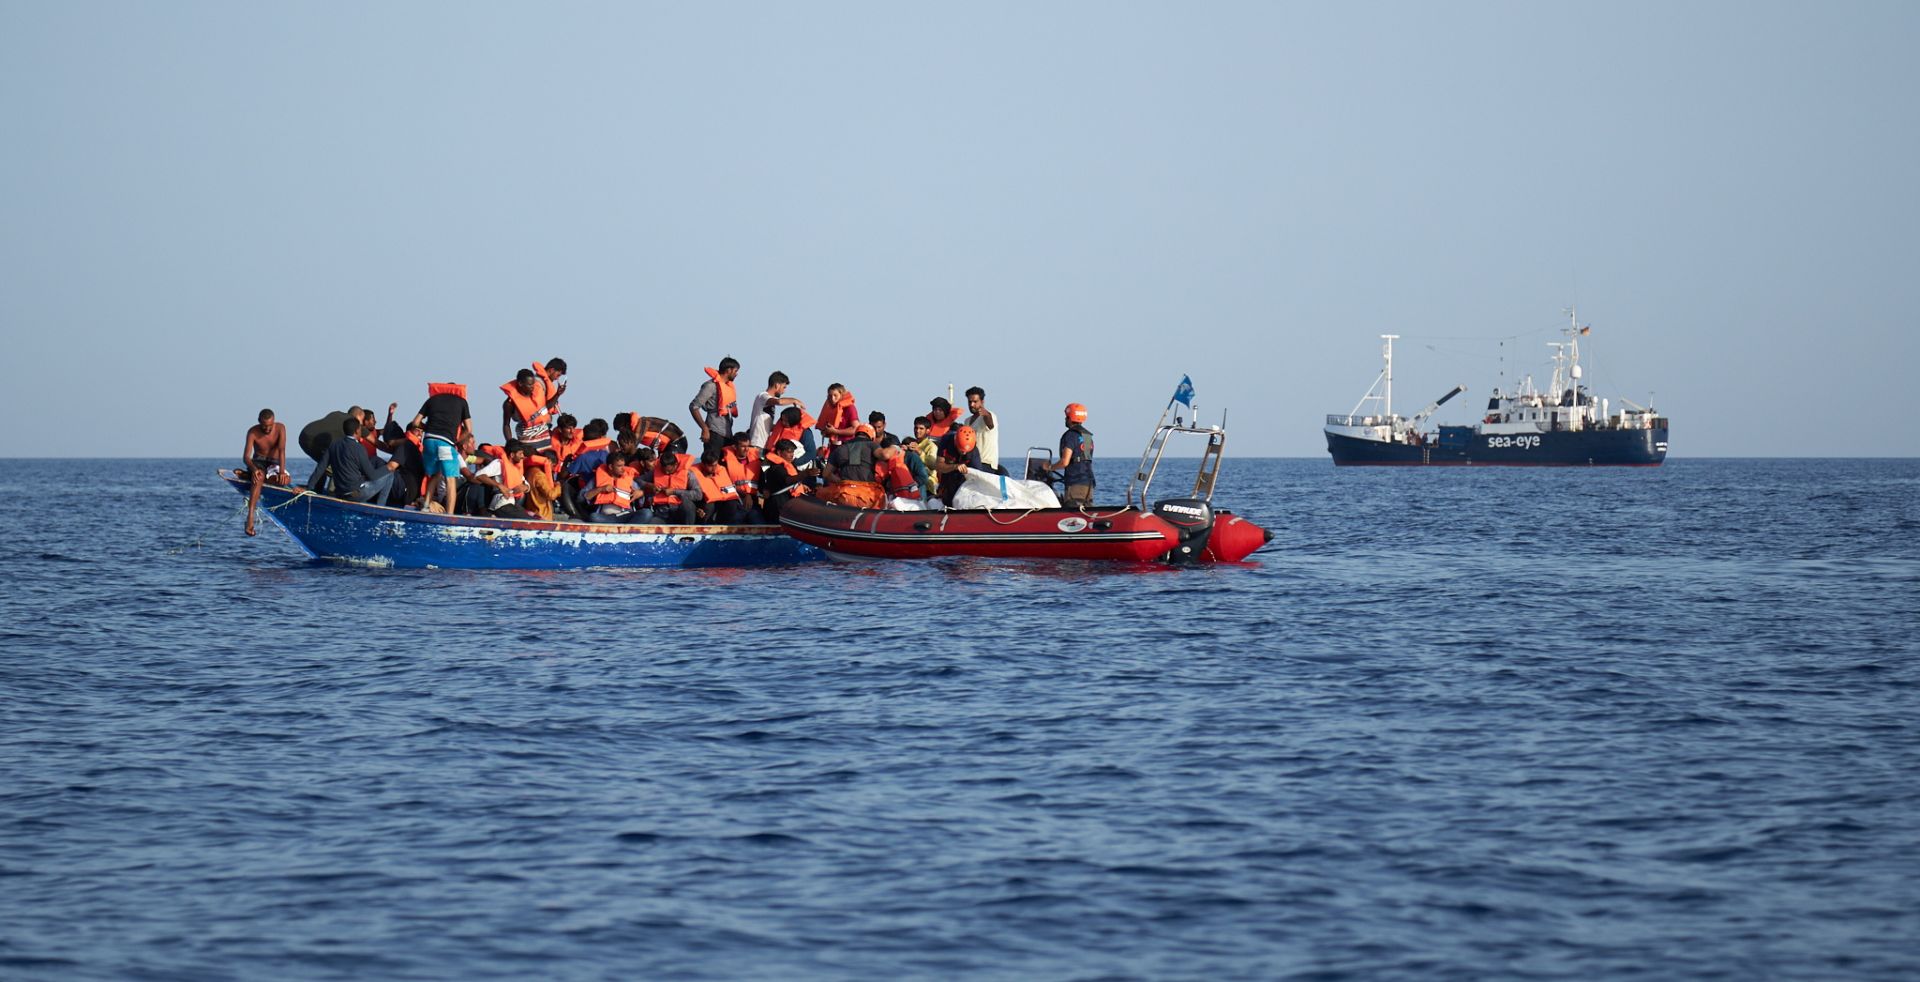 epa07704799 A handout photo made available by German civil sea rescue organisation sea-eye shows a boat carrying migrants (L) and a rescue boat of sea-eye, in the Mediterranean Sea, 08 July 2019 (issued 09 July 2019). According to sea-eye, 44 people were rescued from a woodden boat floating in the Mediterranean between Malta and Lampedusa. The migrants were taken onboard the Alan Kurdi rescue vessel operated by sea-eye and are expected to be transferred to land by the Maltese Navy.  EPA/FABIAN HEINZ / SEA-EYE HANDOUT  HANDOUT EDITORIAL USE ONLY/NO SALES